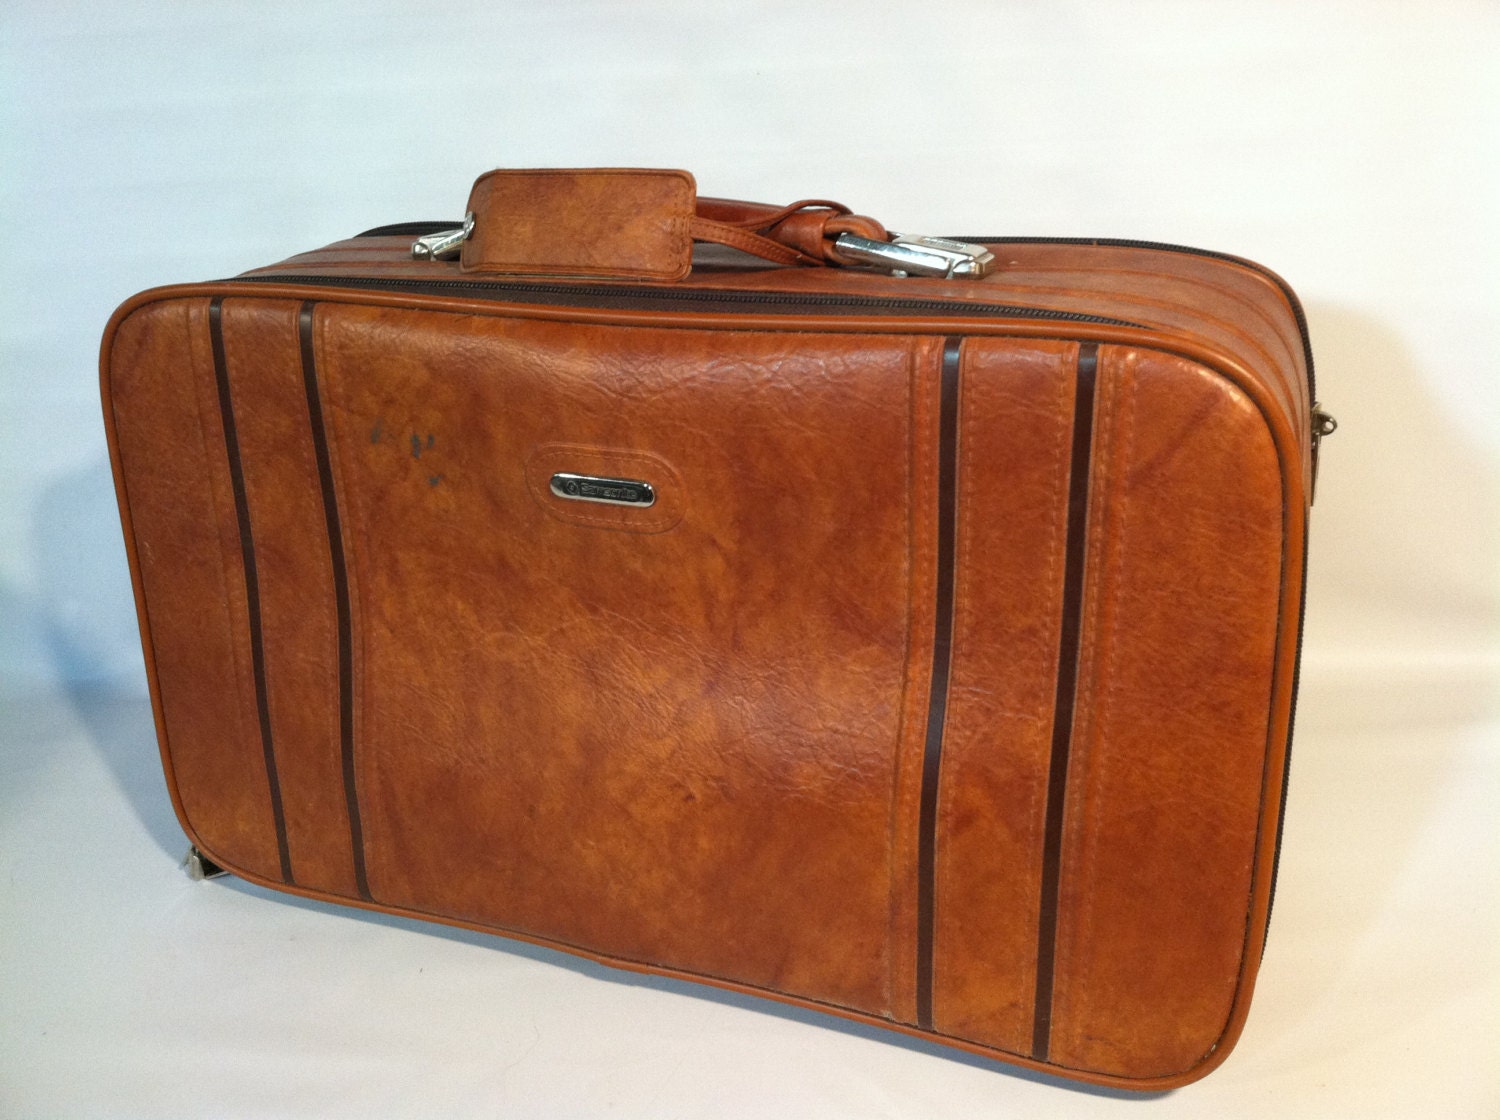 Brown Old Samsonite Suitcase Travel Case Bag Carry On Luggage